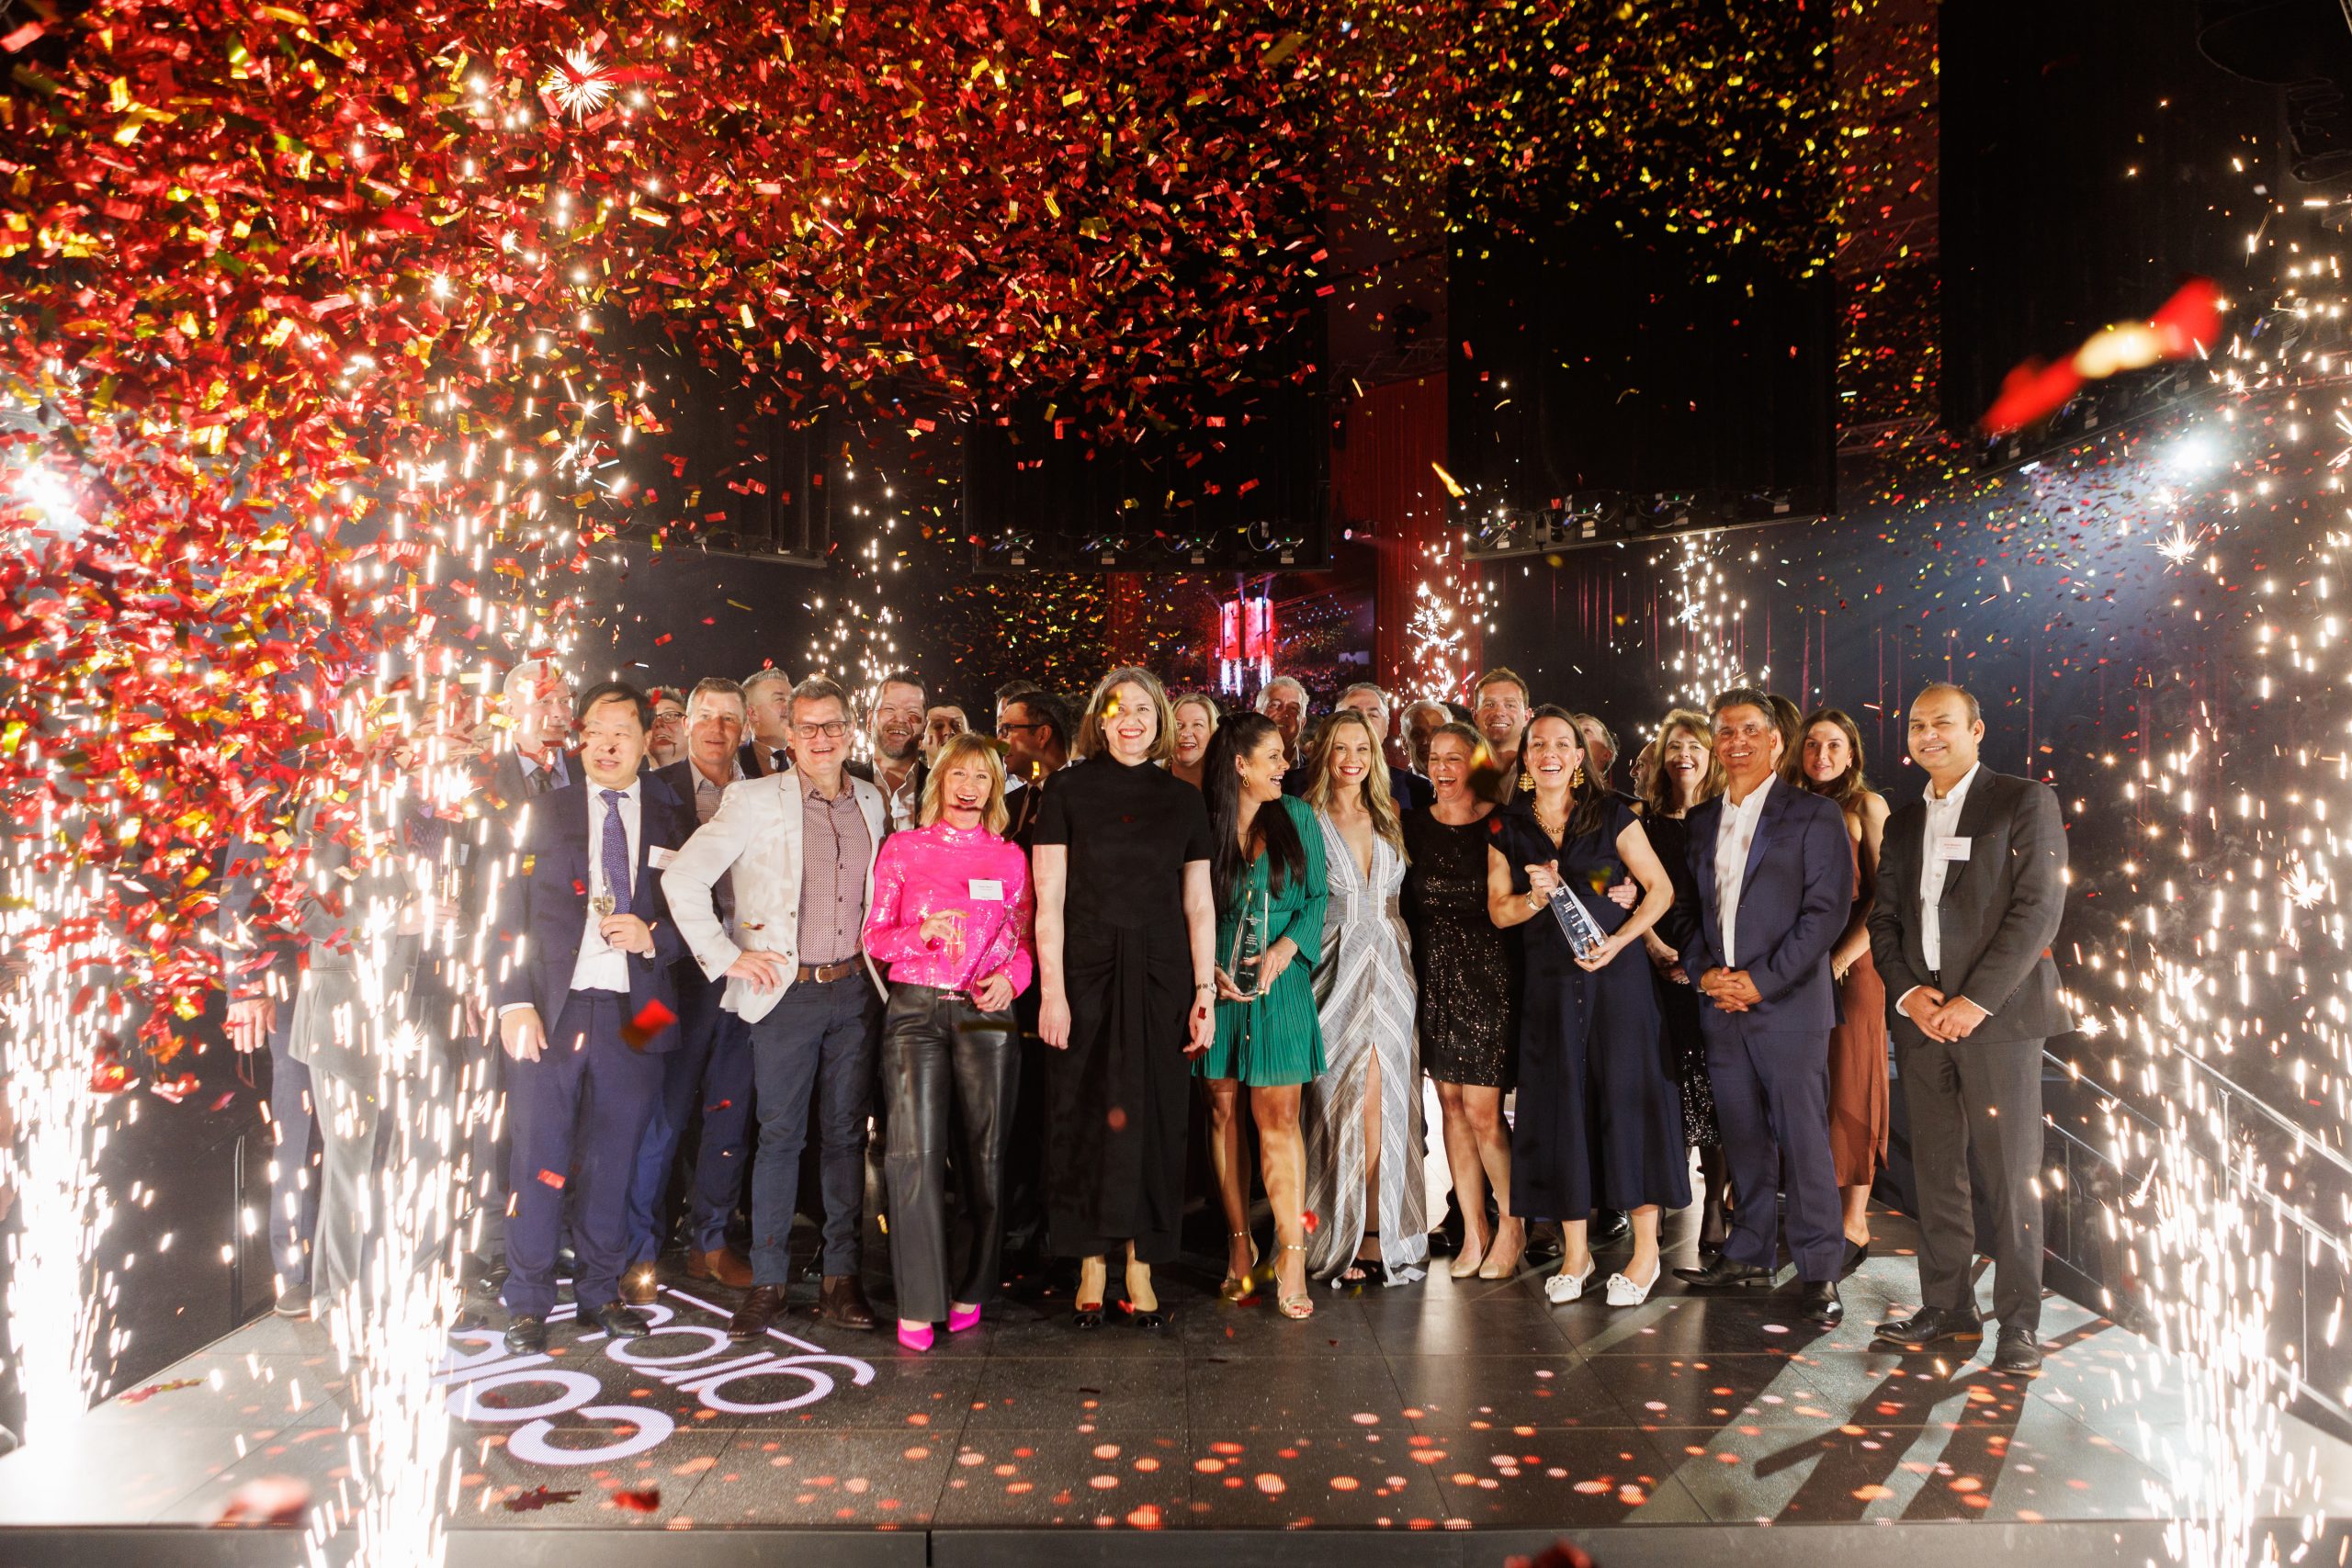 Coles celebrates suppliers championing quality, value and community